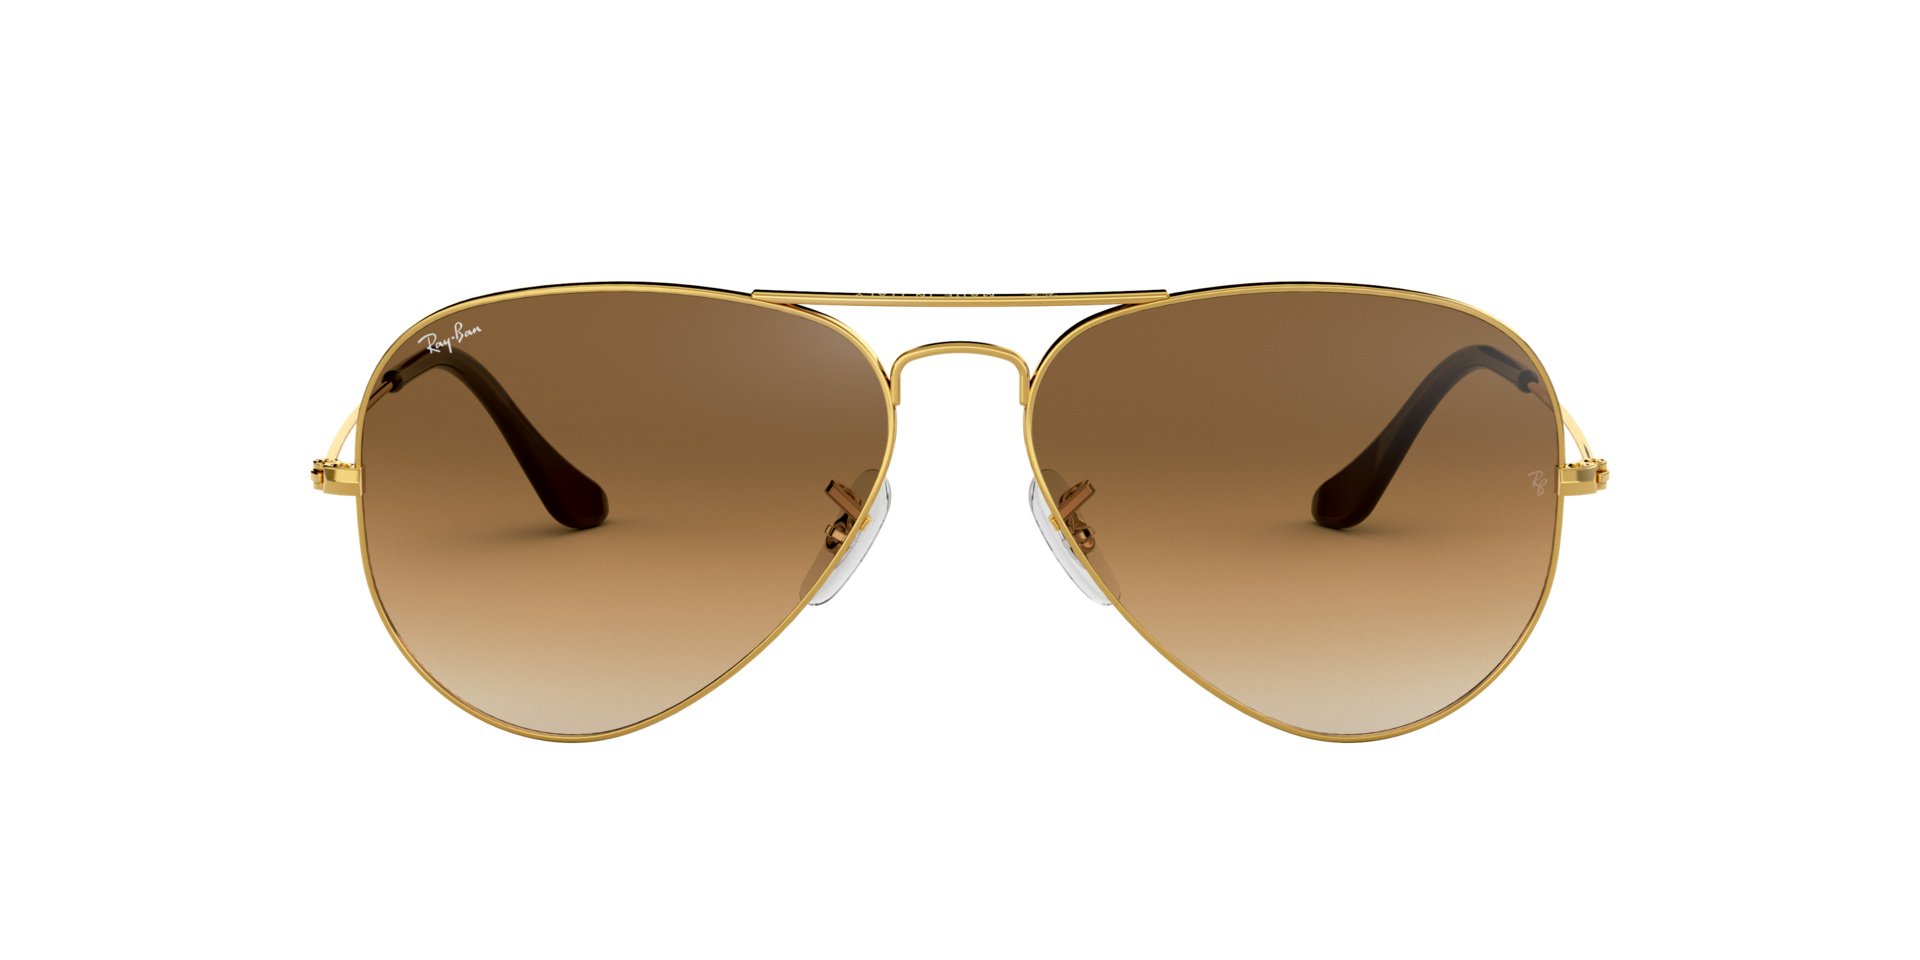 Ray Ban Aviator Large Metal Sonnenbrille RB3025 001/51 58